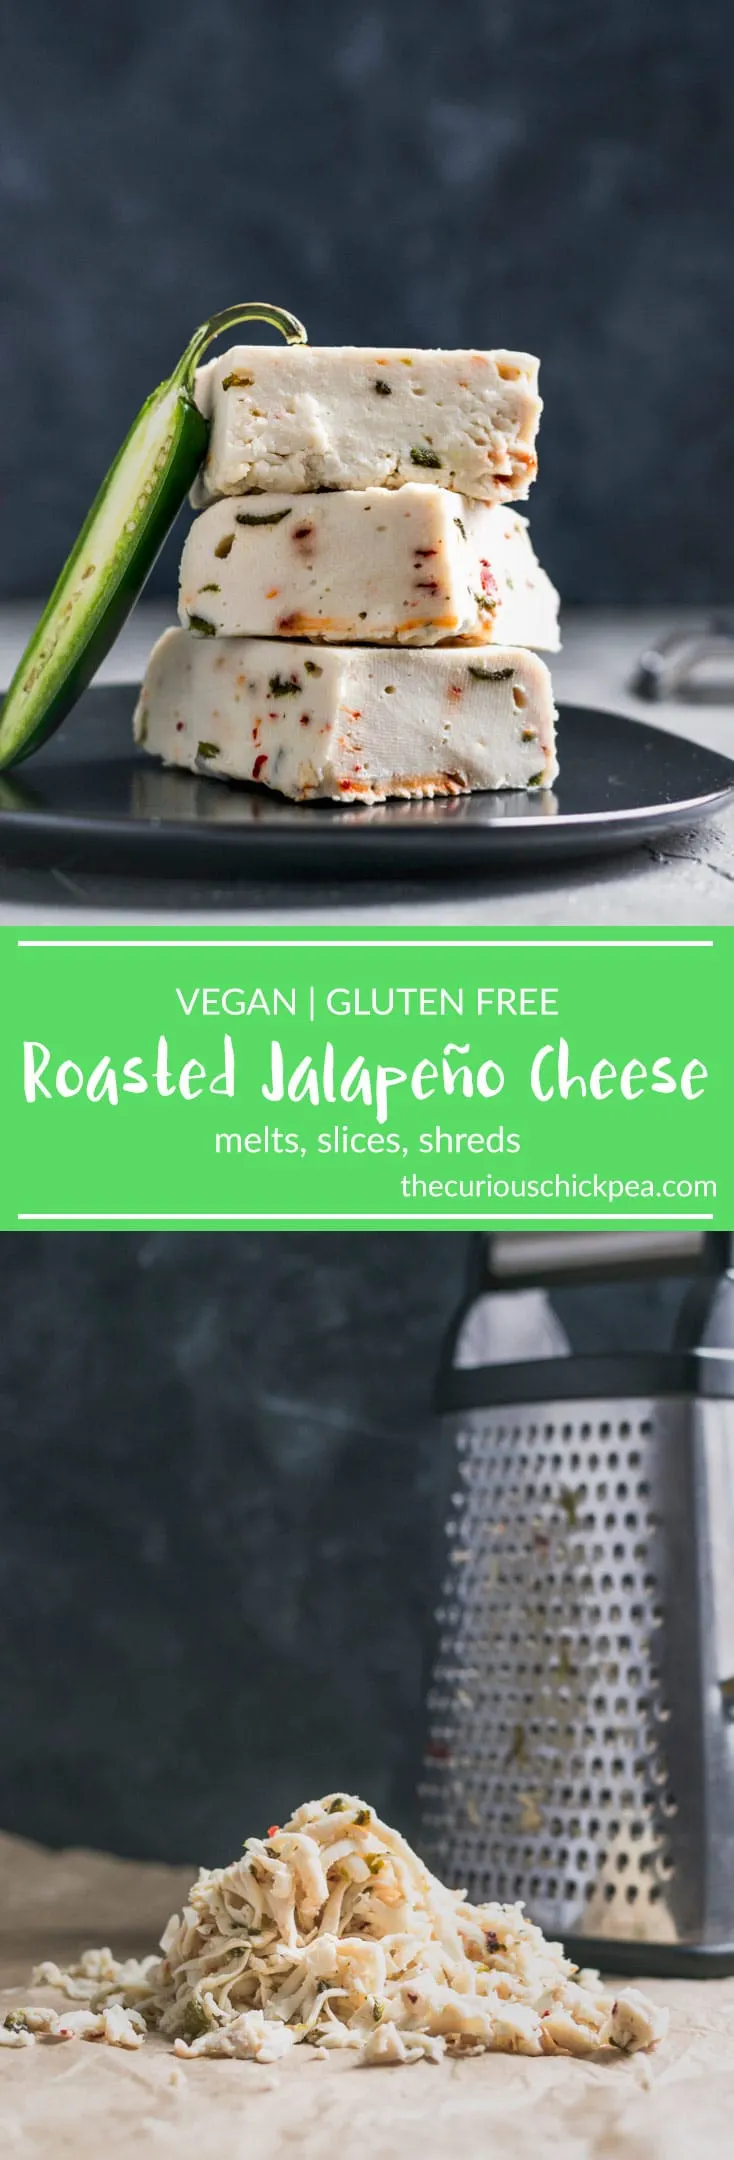 Roasted Jalapeño Cheese | Vegan, Gluten Free, Quick & Easy. Learn how to make this cashew-based cheese which melts to gooey, stretchy texture and is packed with delicious peppery roasted jalapeño flavor. | thecuriouschickpea.com